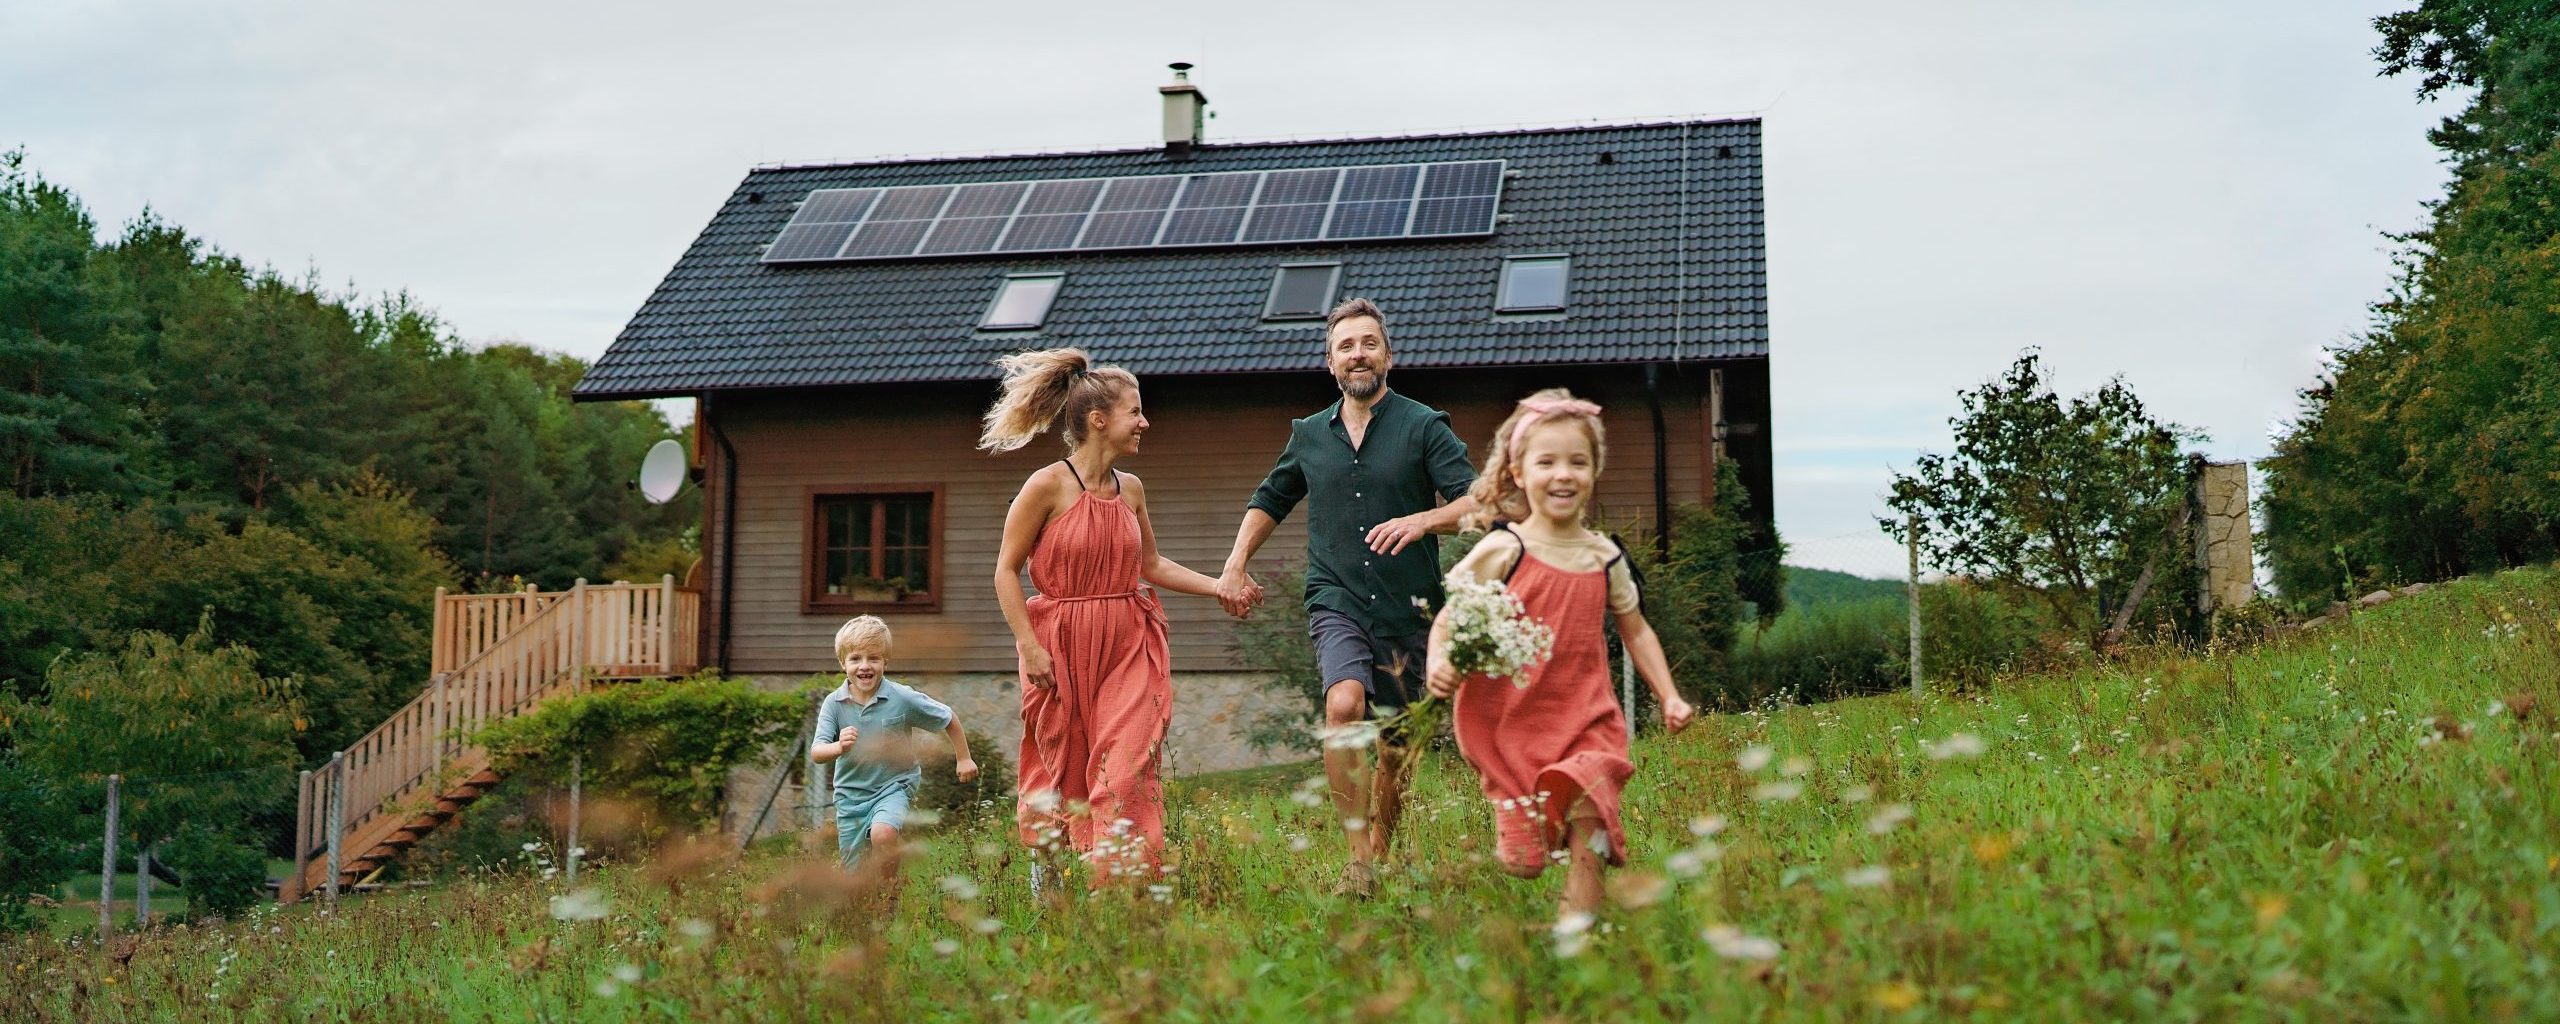 A smiling family with a solar panel system on their roof